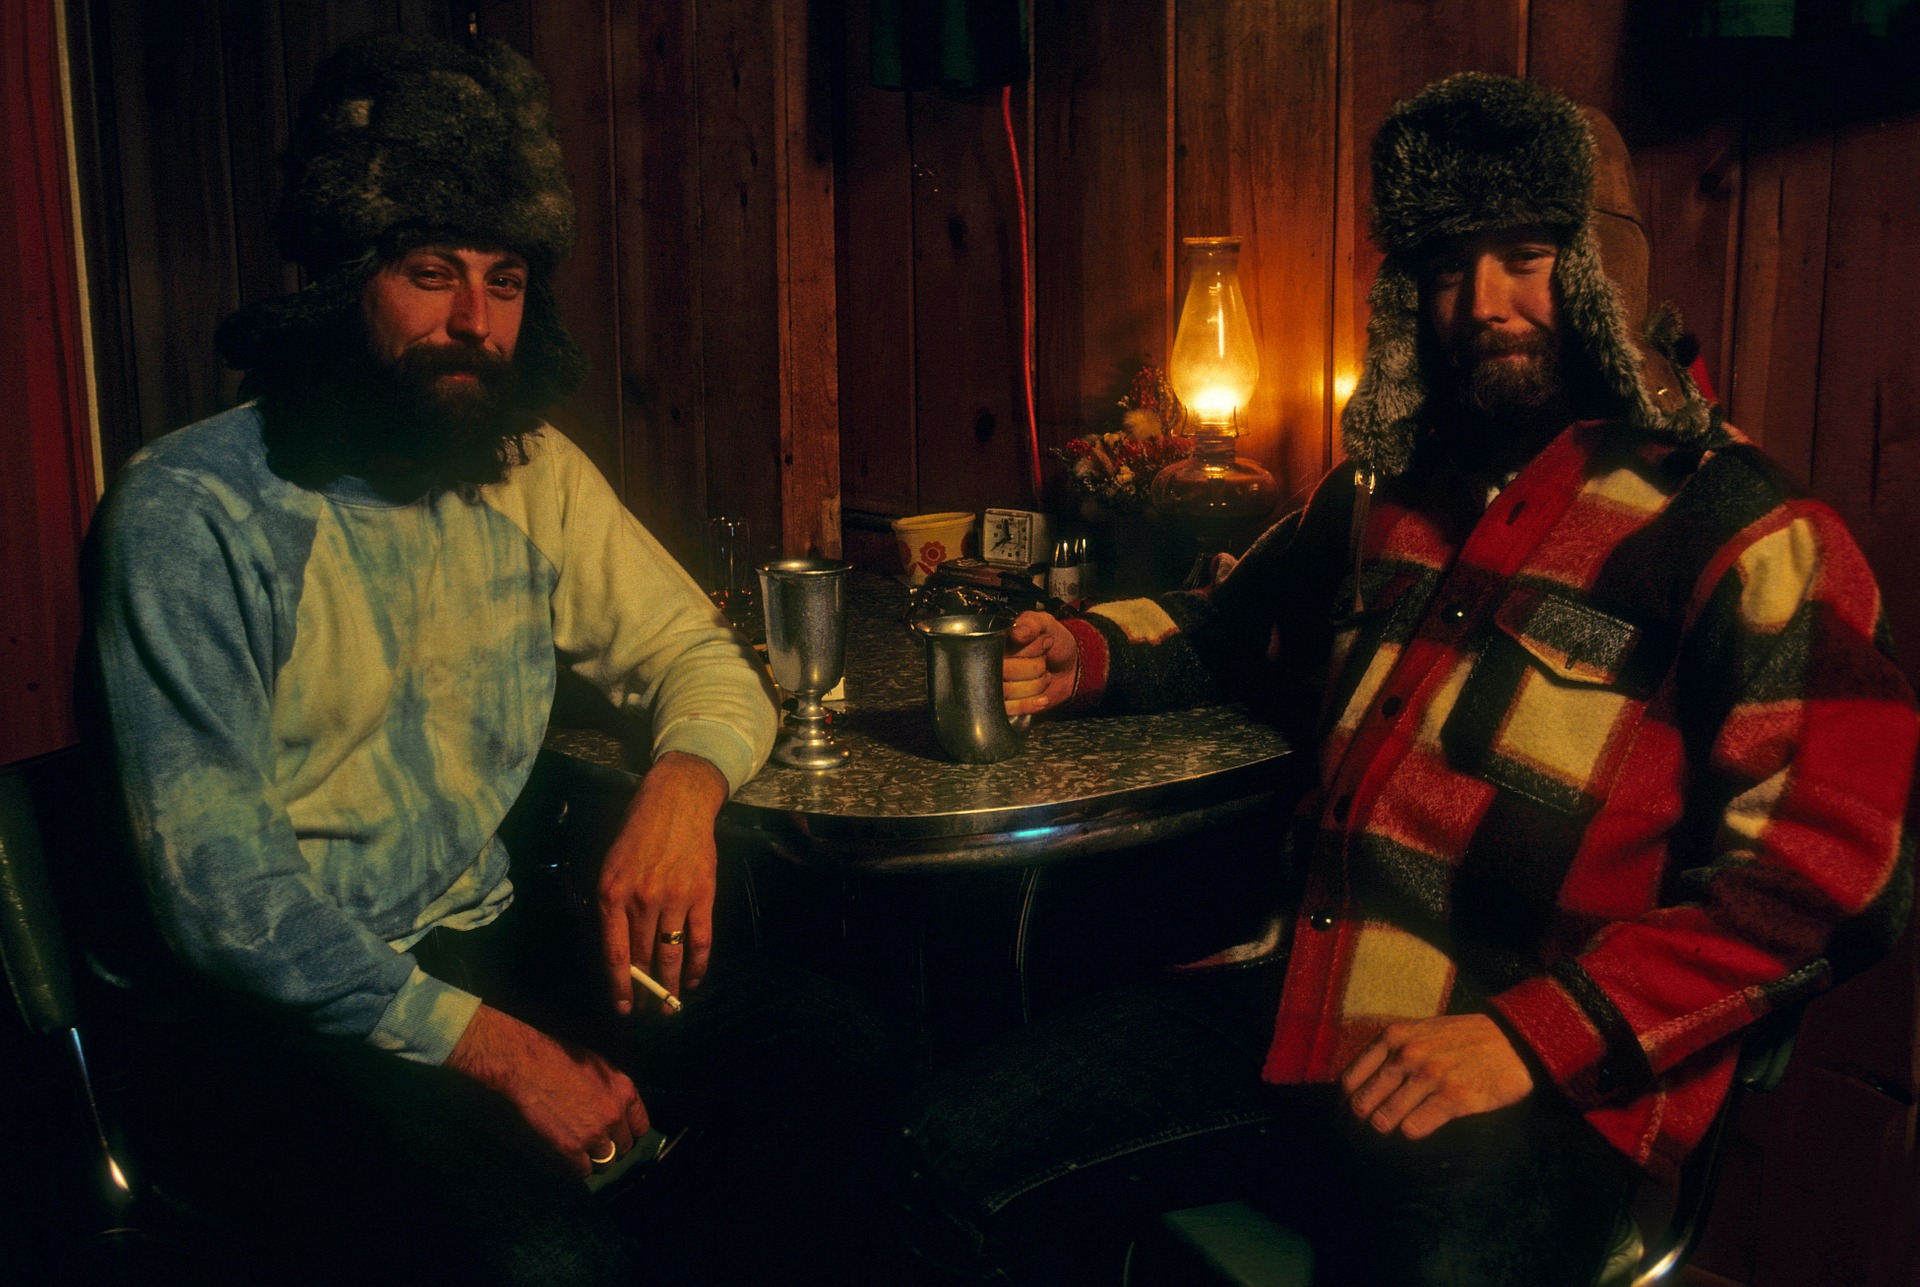 Alaskan hunters in a cabin, being quiet. Don't you miss that?